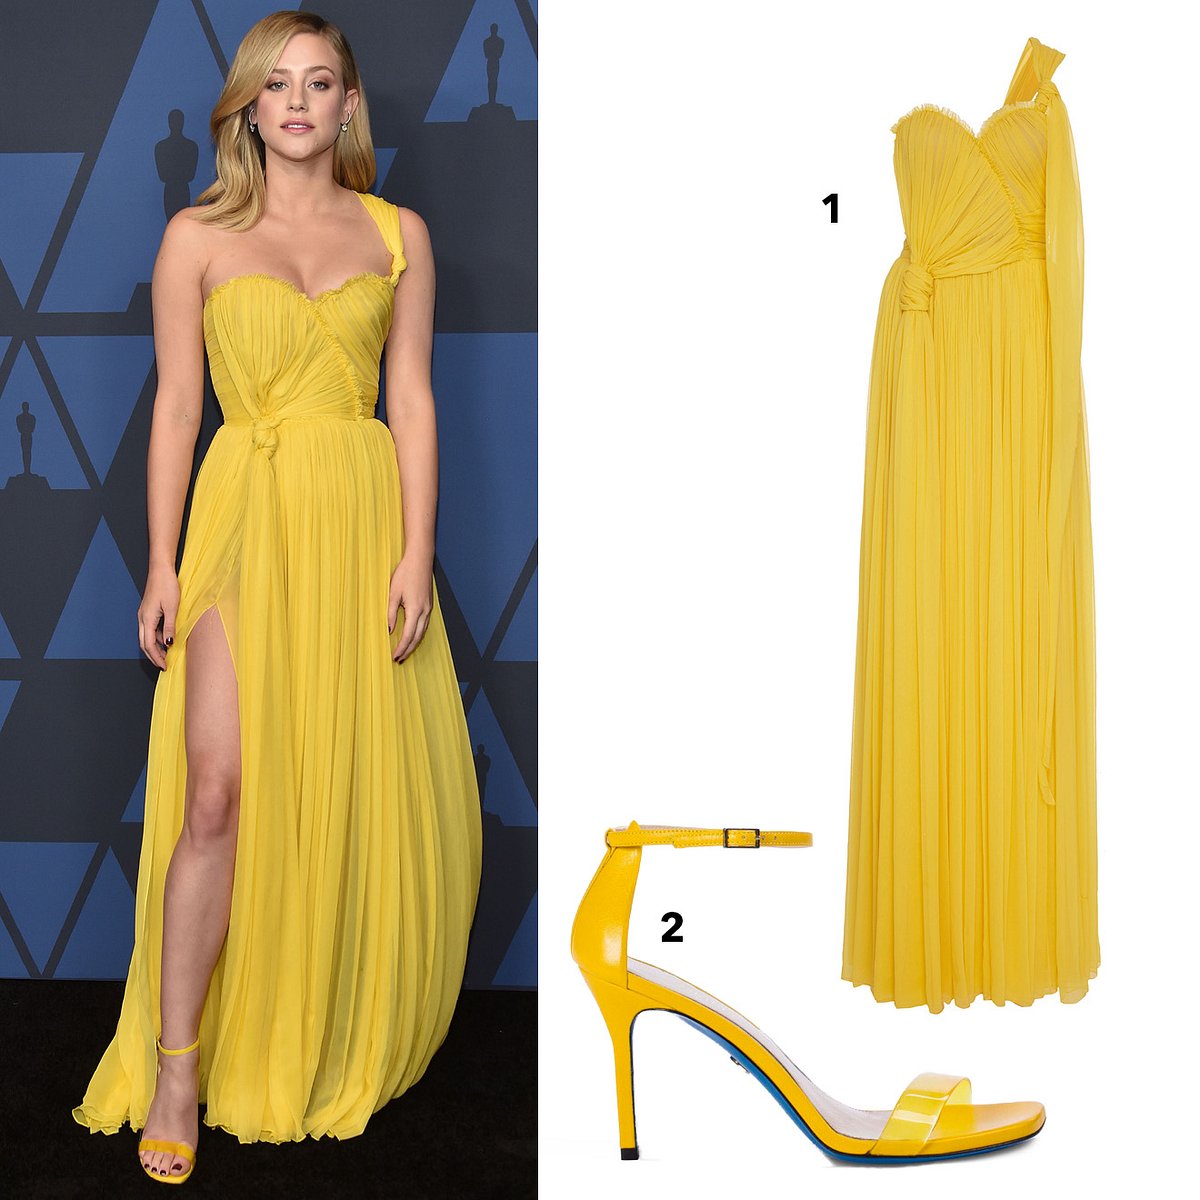 Steal Style, Star Style, Star Outfits, Outfit Lili Reinhart, Klamotten Stars, Klamotten Lili Reinhart, look like Lili Reinhart, wie Lili Reinhart aussehen